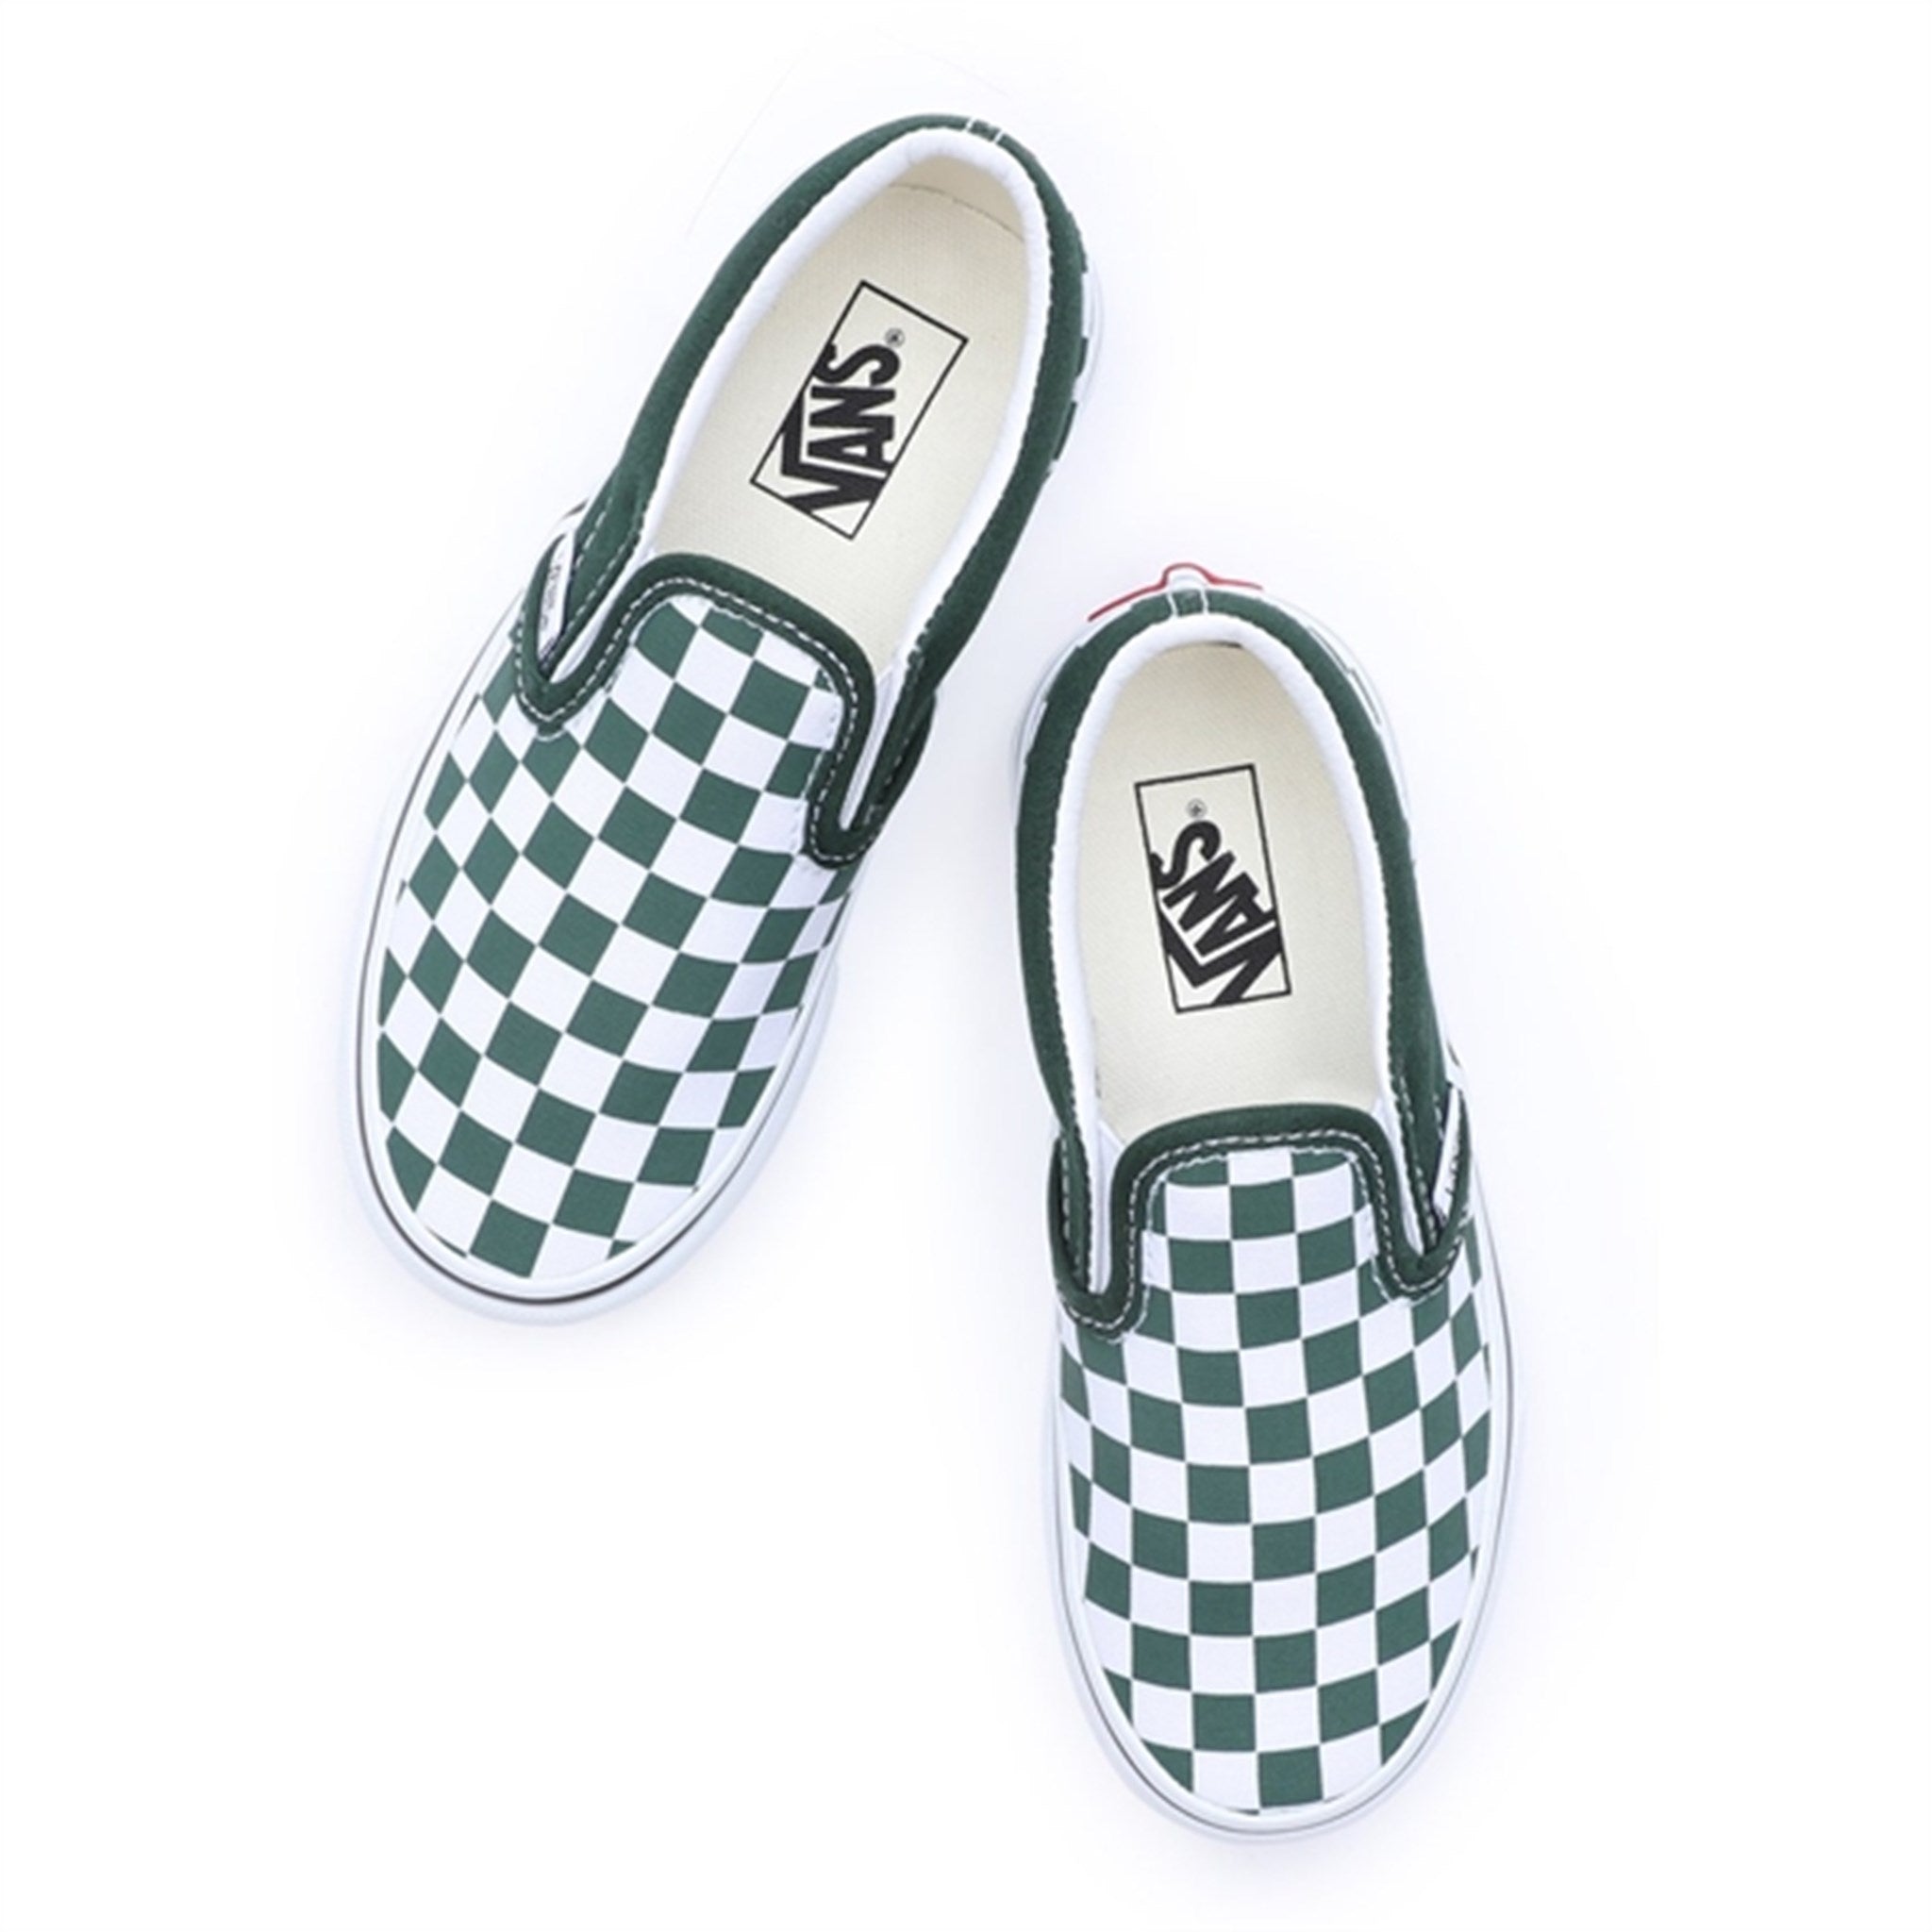 VANS Uy Classic Slip-On Color Theory Checkerboard Mountain View Skor